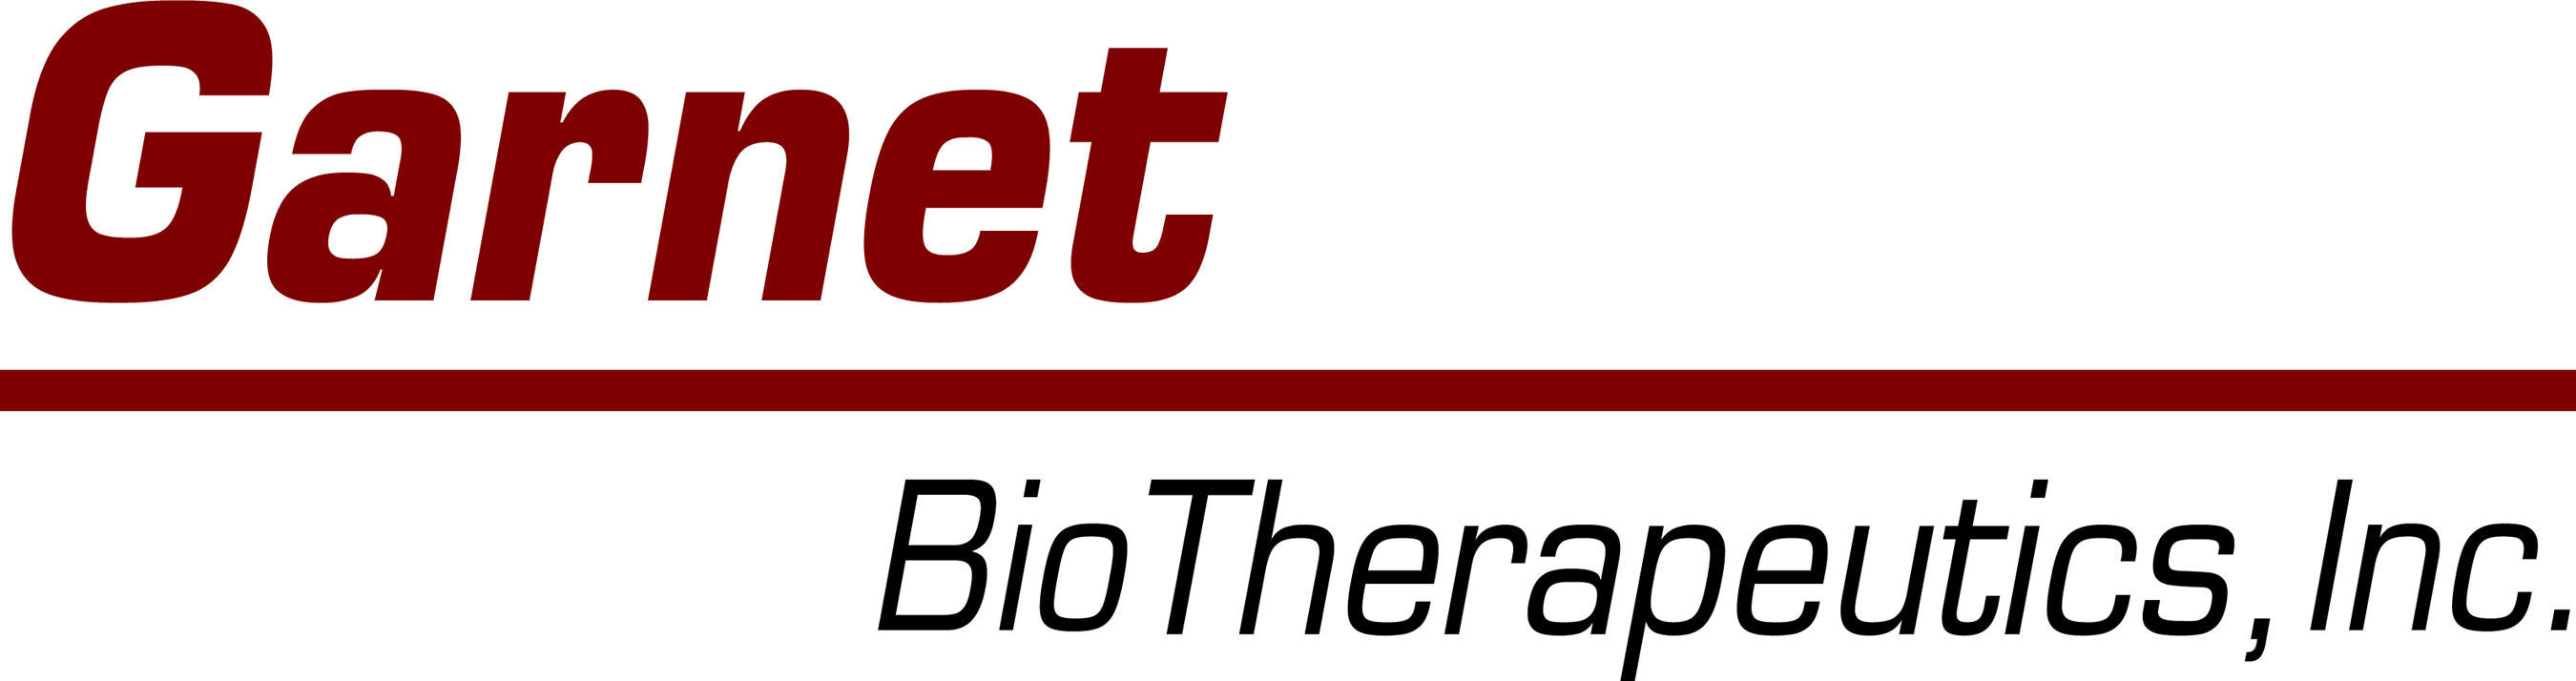 Garnet's mission is to discover, develop, and deliver new regenerative therapies by leveraging the intrinsic ability of adult somatic cells to repair, regenerate, and remodel tissue in acute and chronic disease settings.